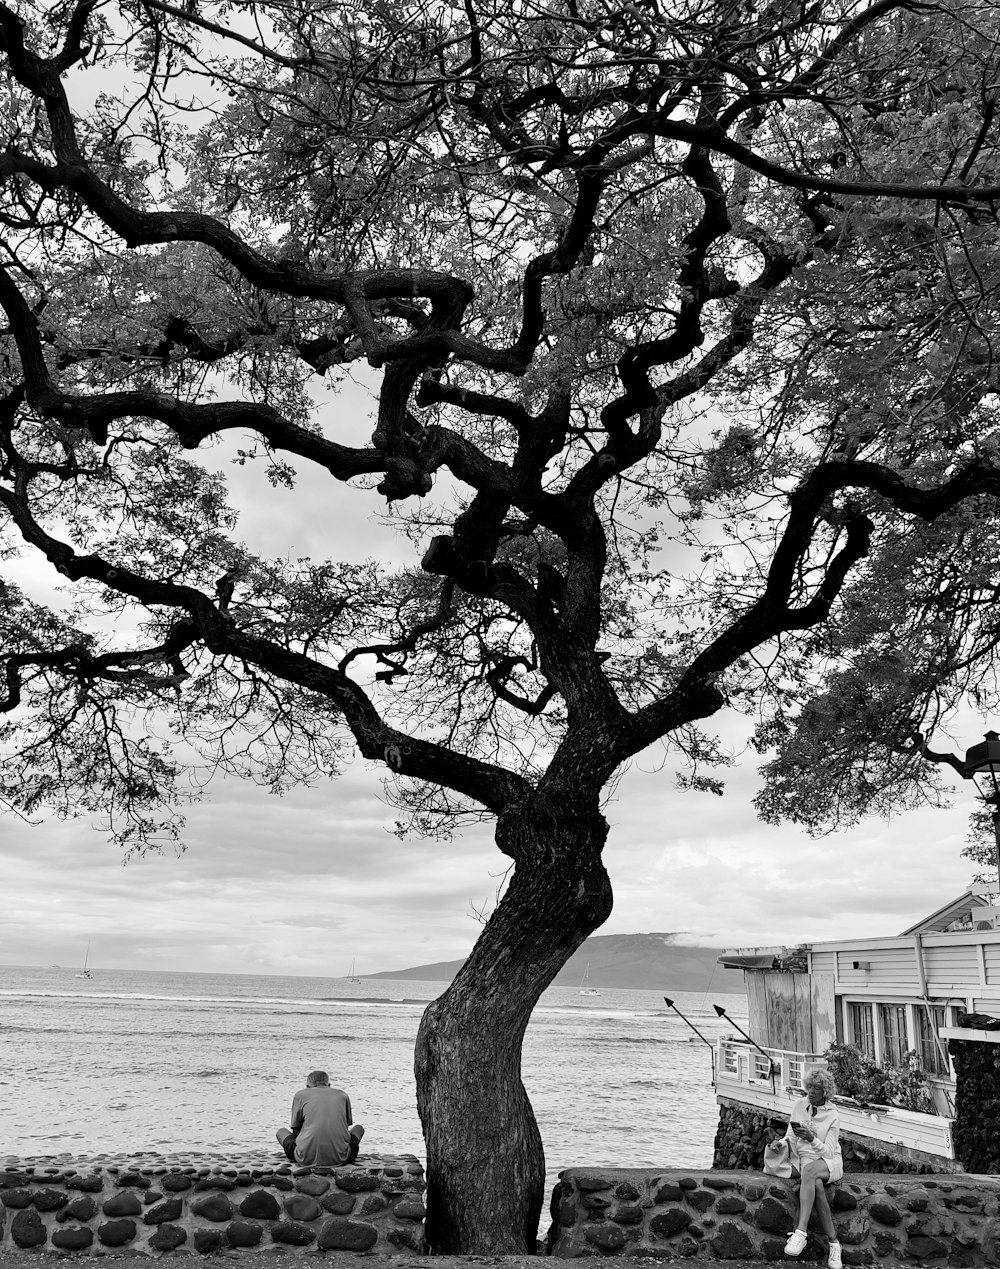 a black and white photo of a man sitting on a bench next to a tree